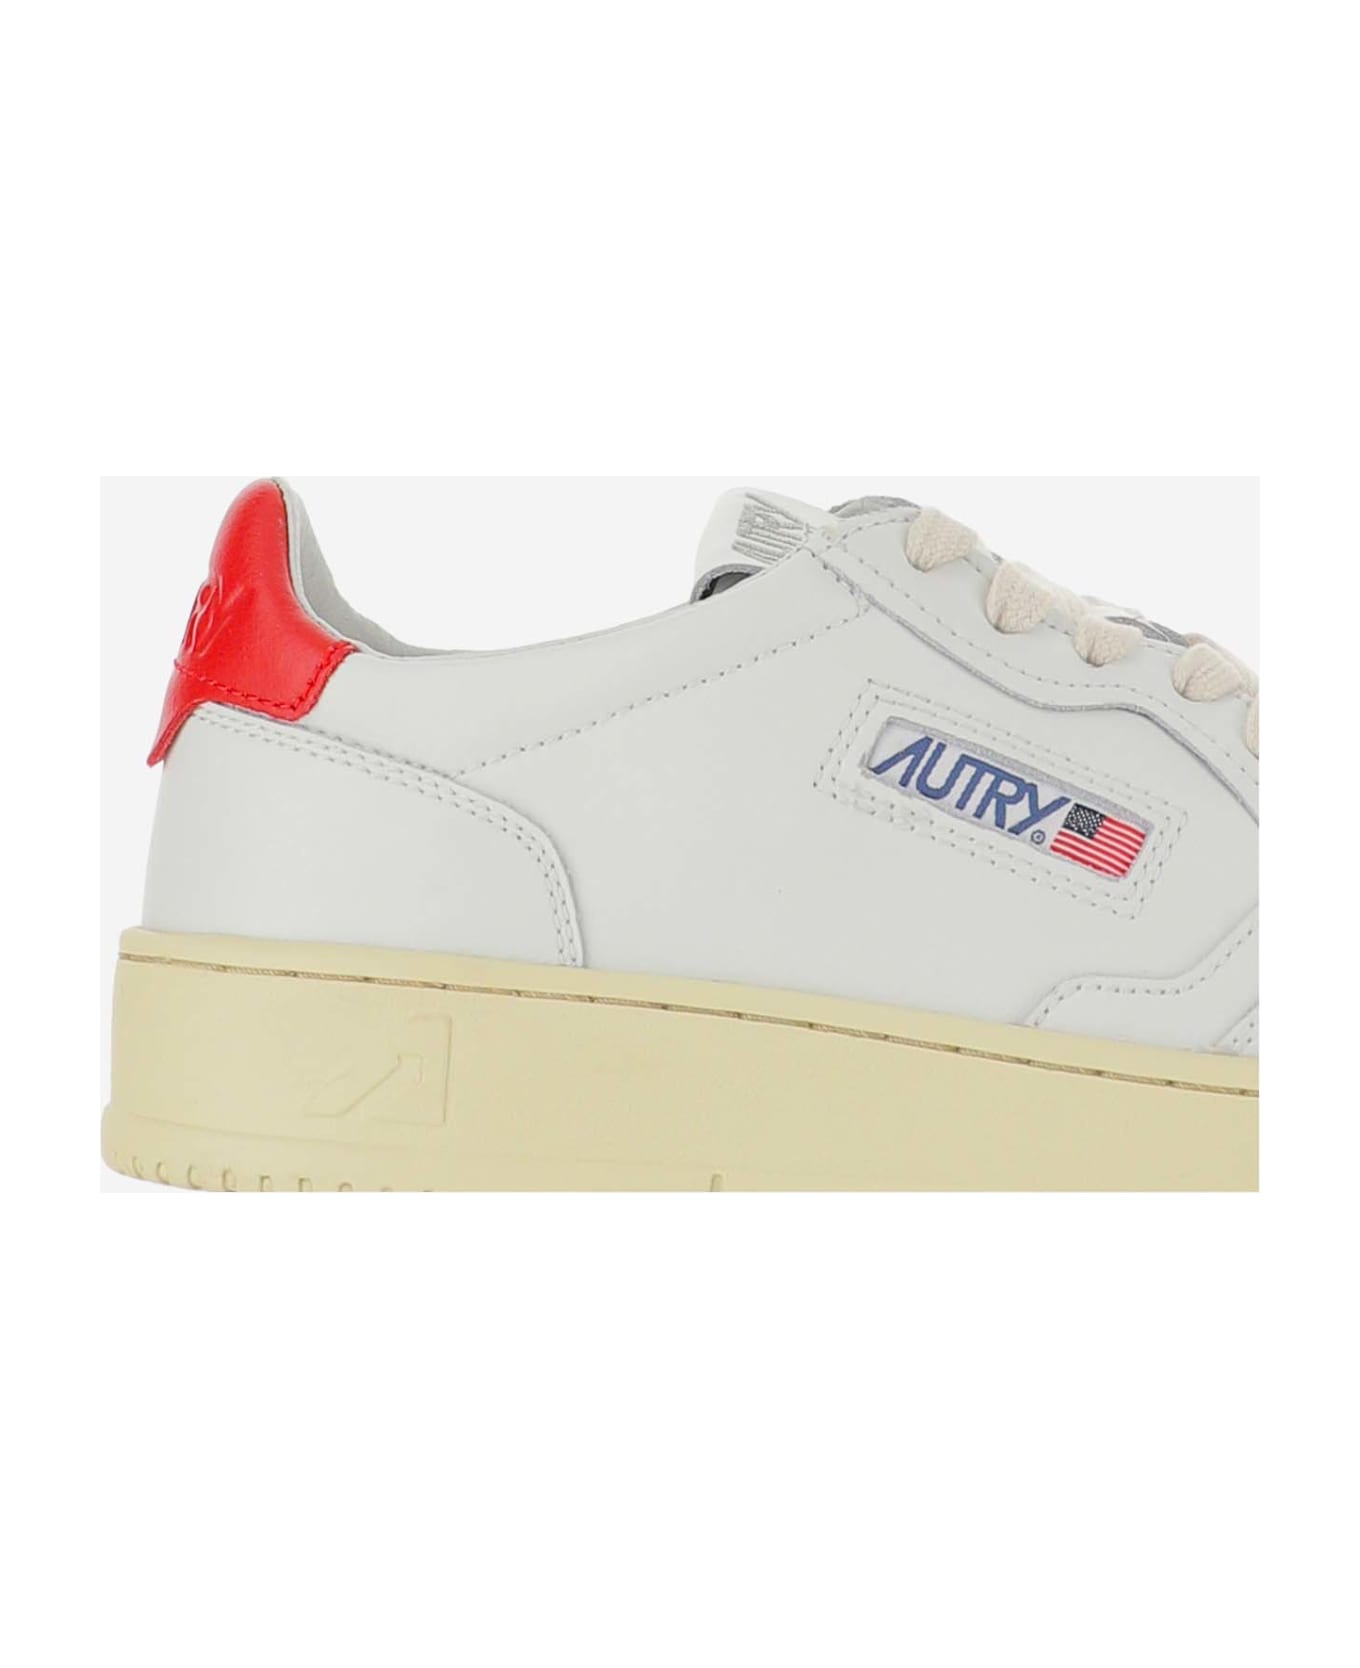 Autry Low Medalist Sneakers - Wht/red スニーカー